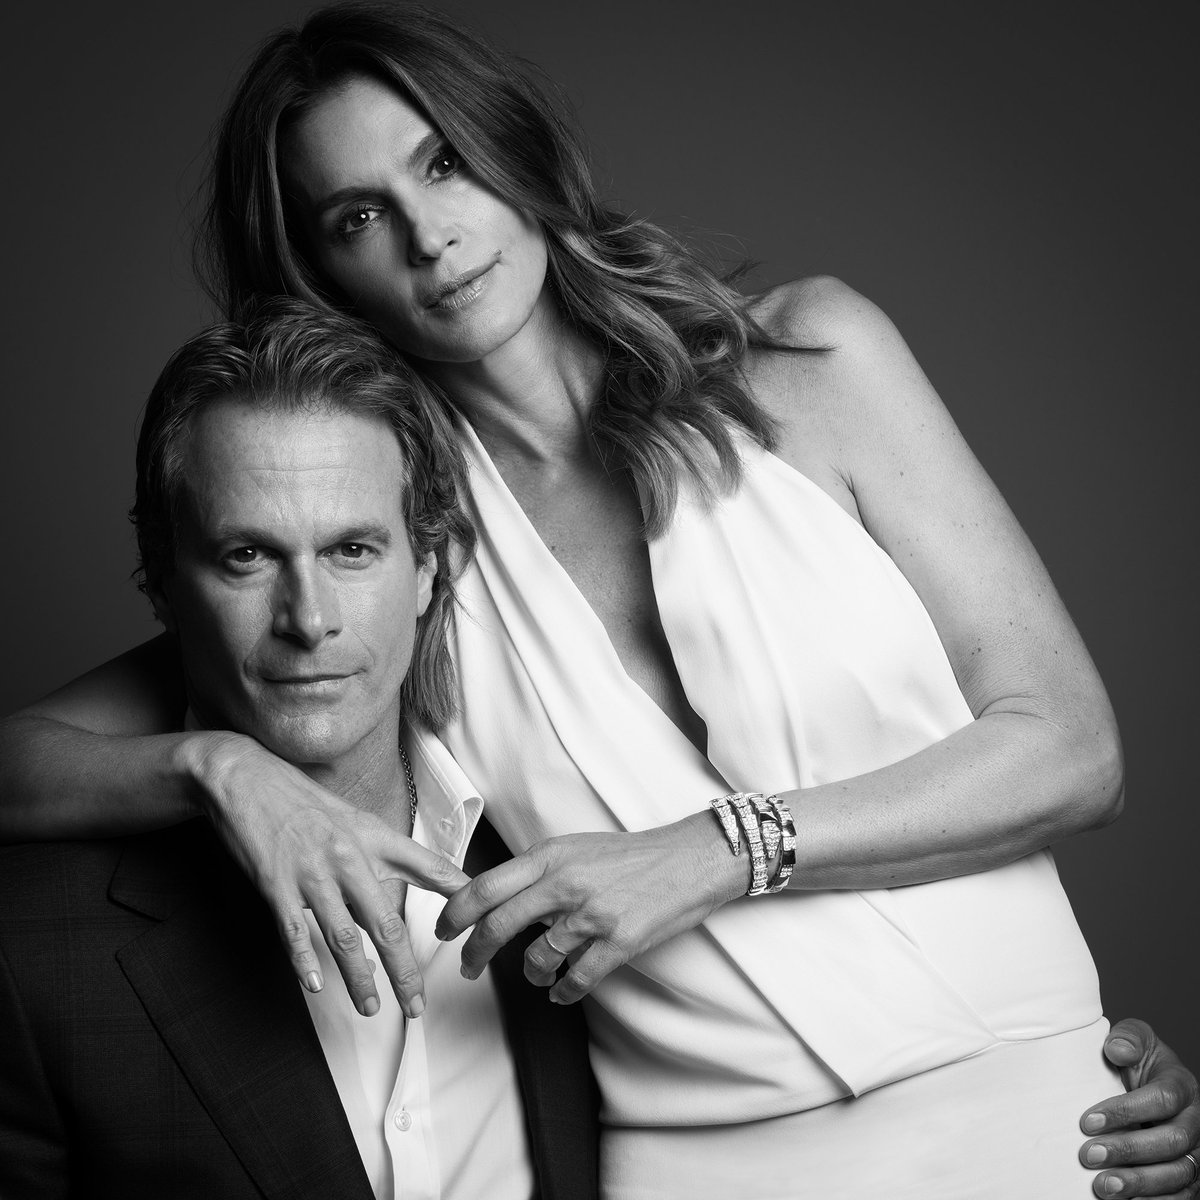 RT @TOMFORD: @CindyCrawford and @randegerber at the TOM FORD AW16 Show. Photographed by @inezandvinoodh #TOMFORD #TFAW16 https://t.co/Y7p5O…